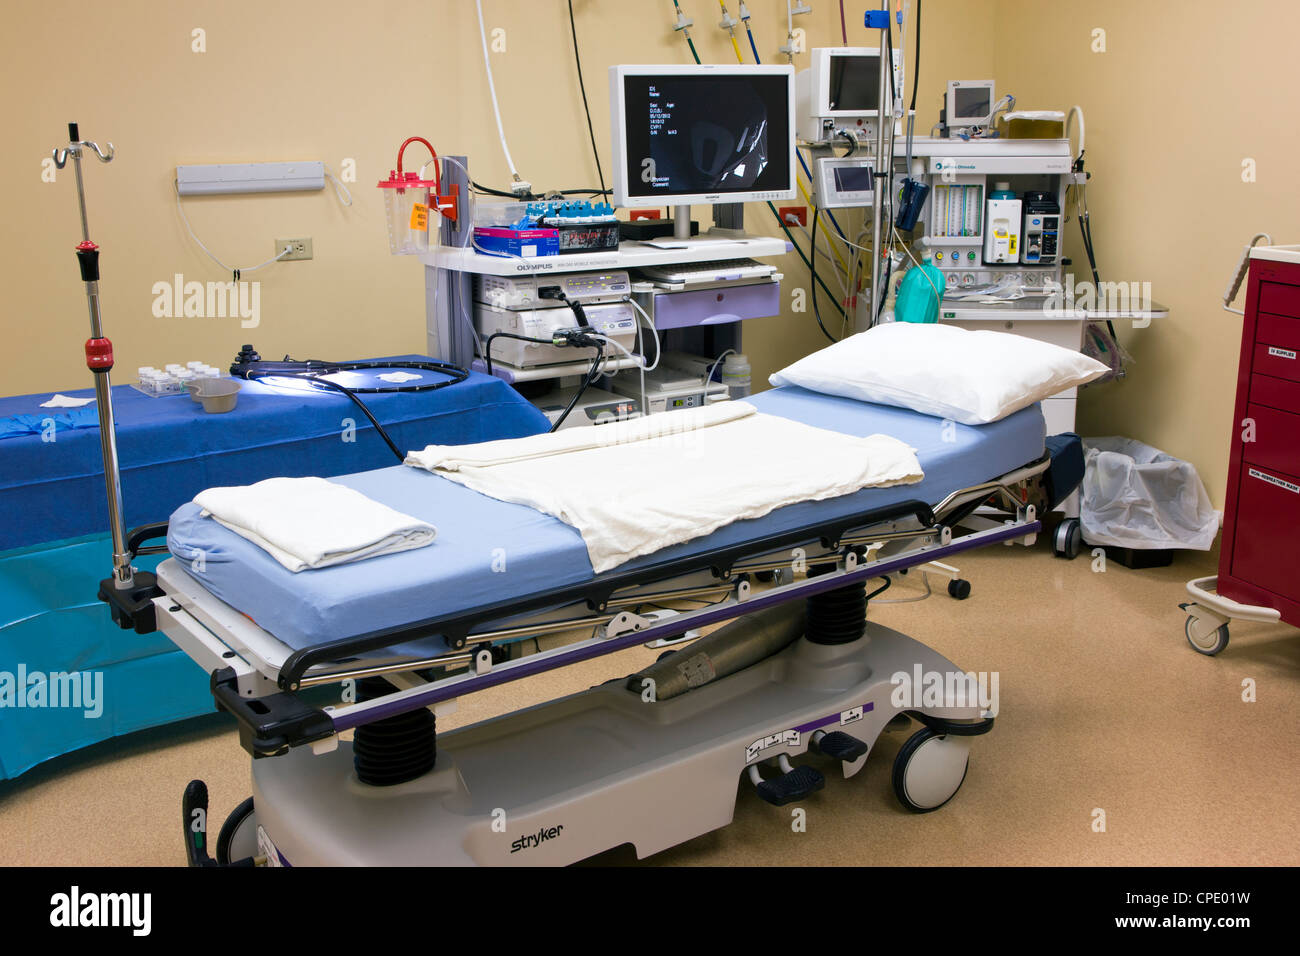 Surgical suite in hospital prepared for endoscopy and colonoscopy procedures. Stock Photo